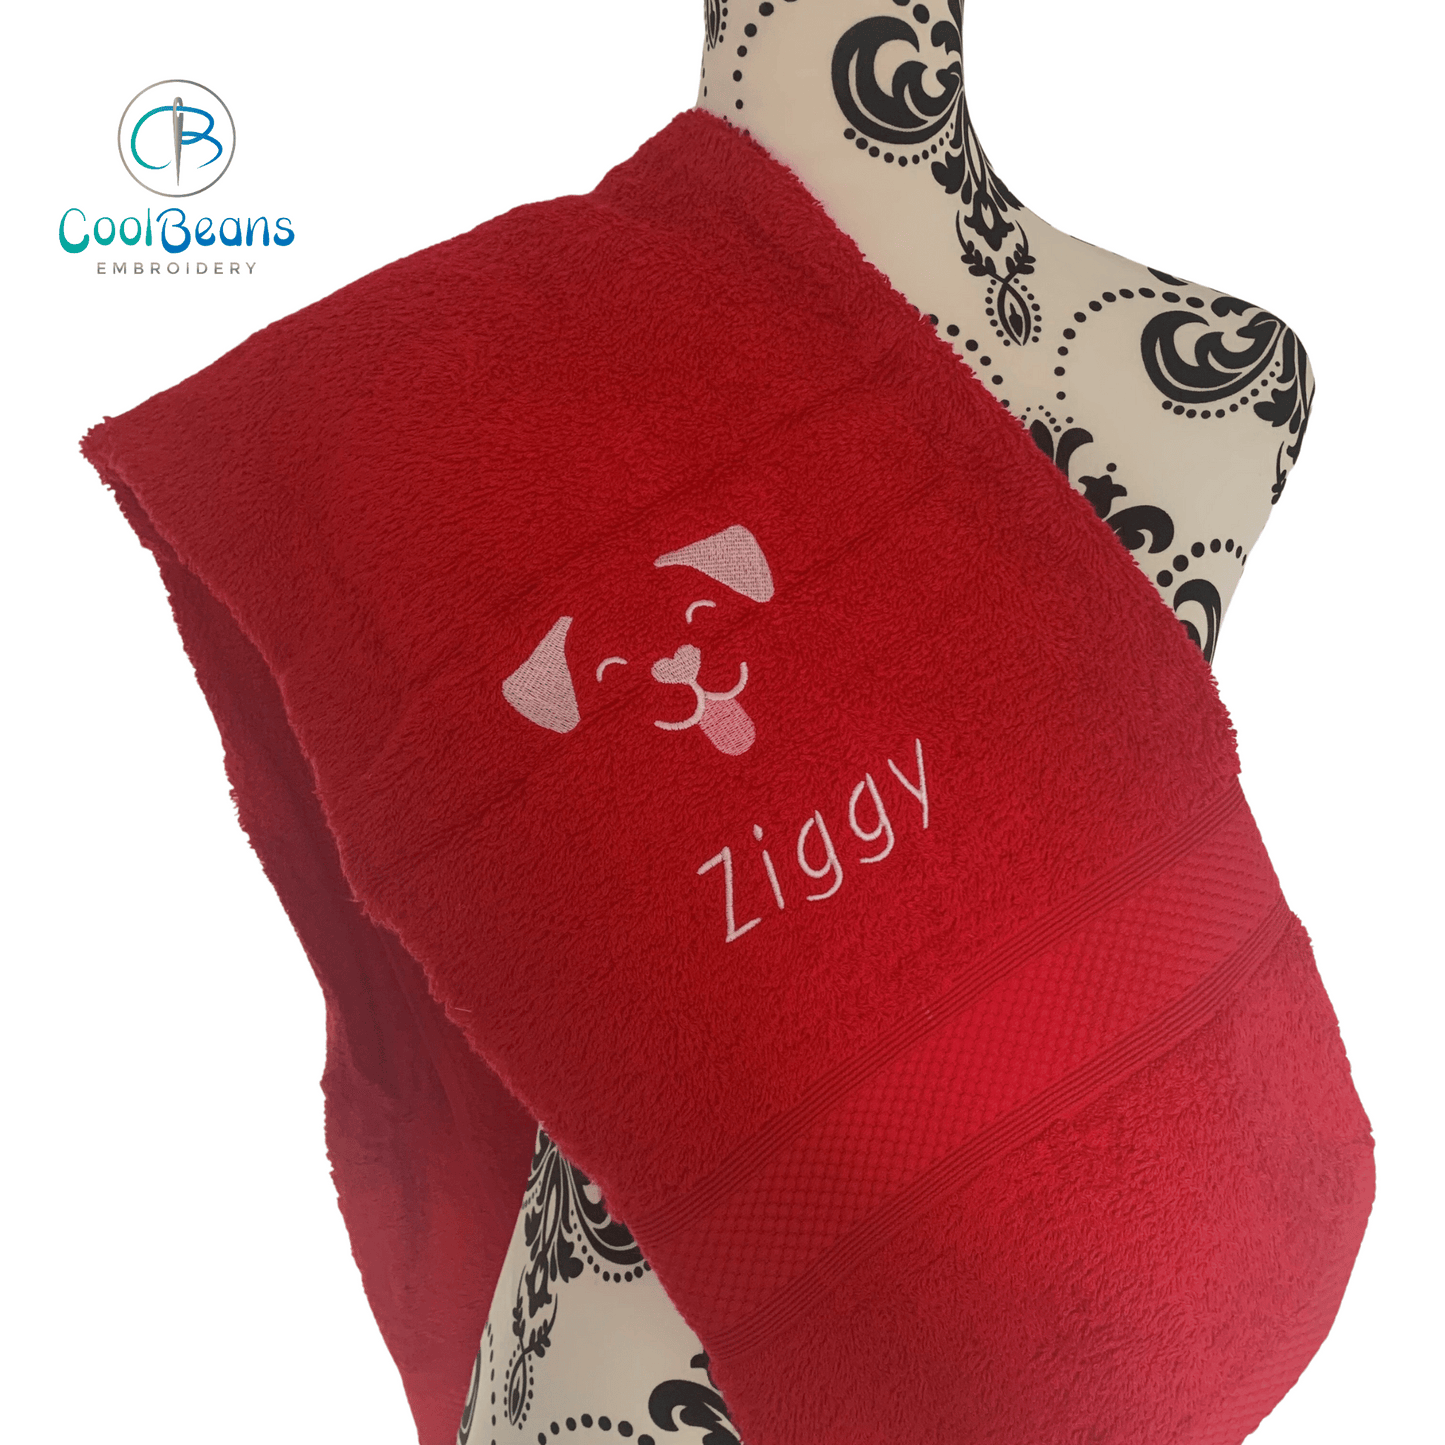 Dog Towels - Dog Face - Personalised - Cool Beans Embroidery & Personalisation